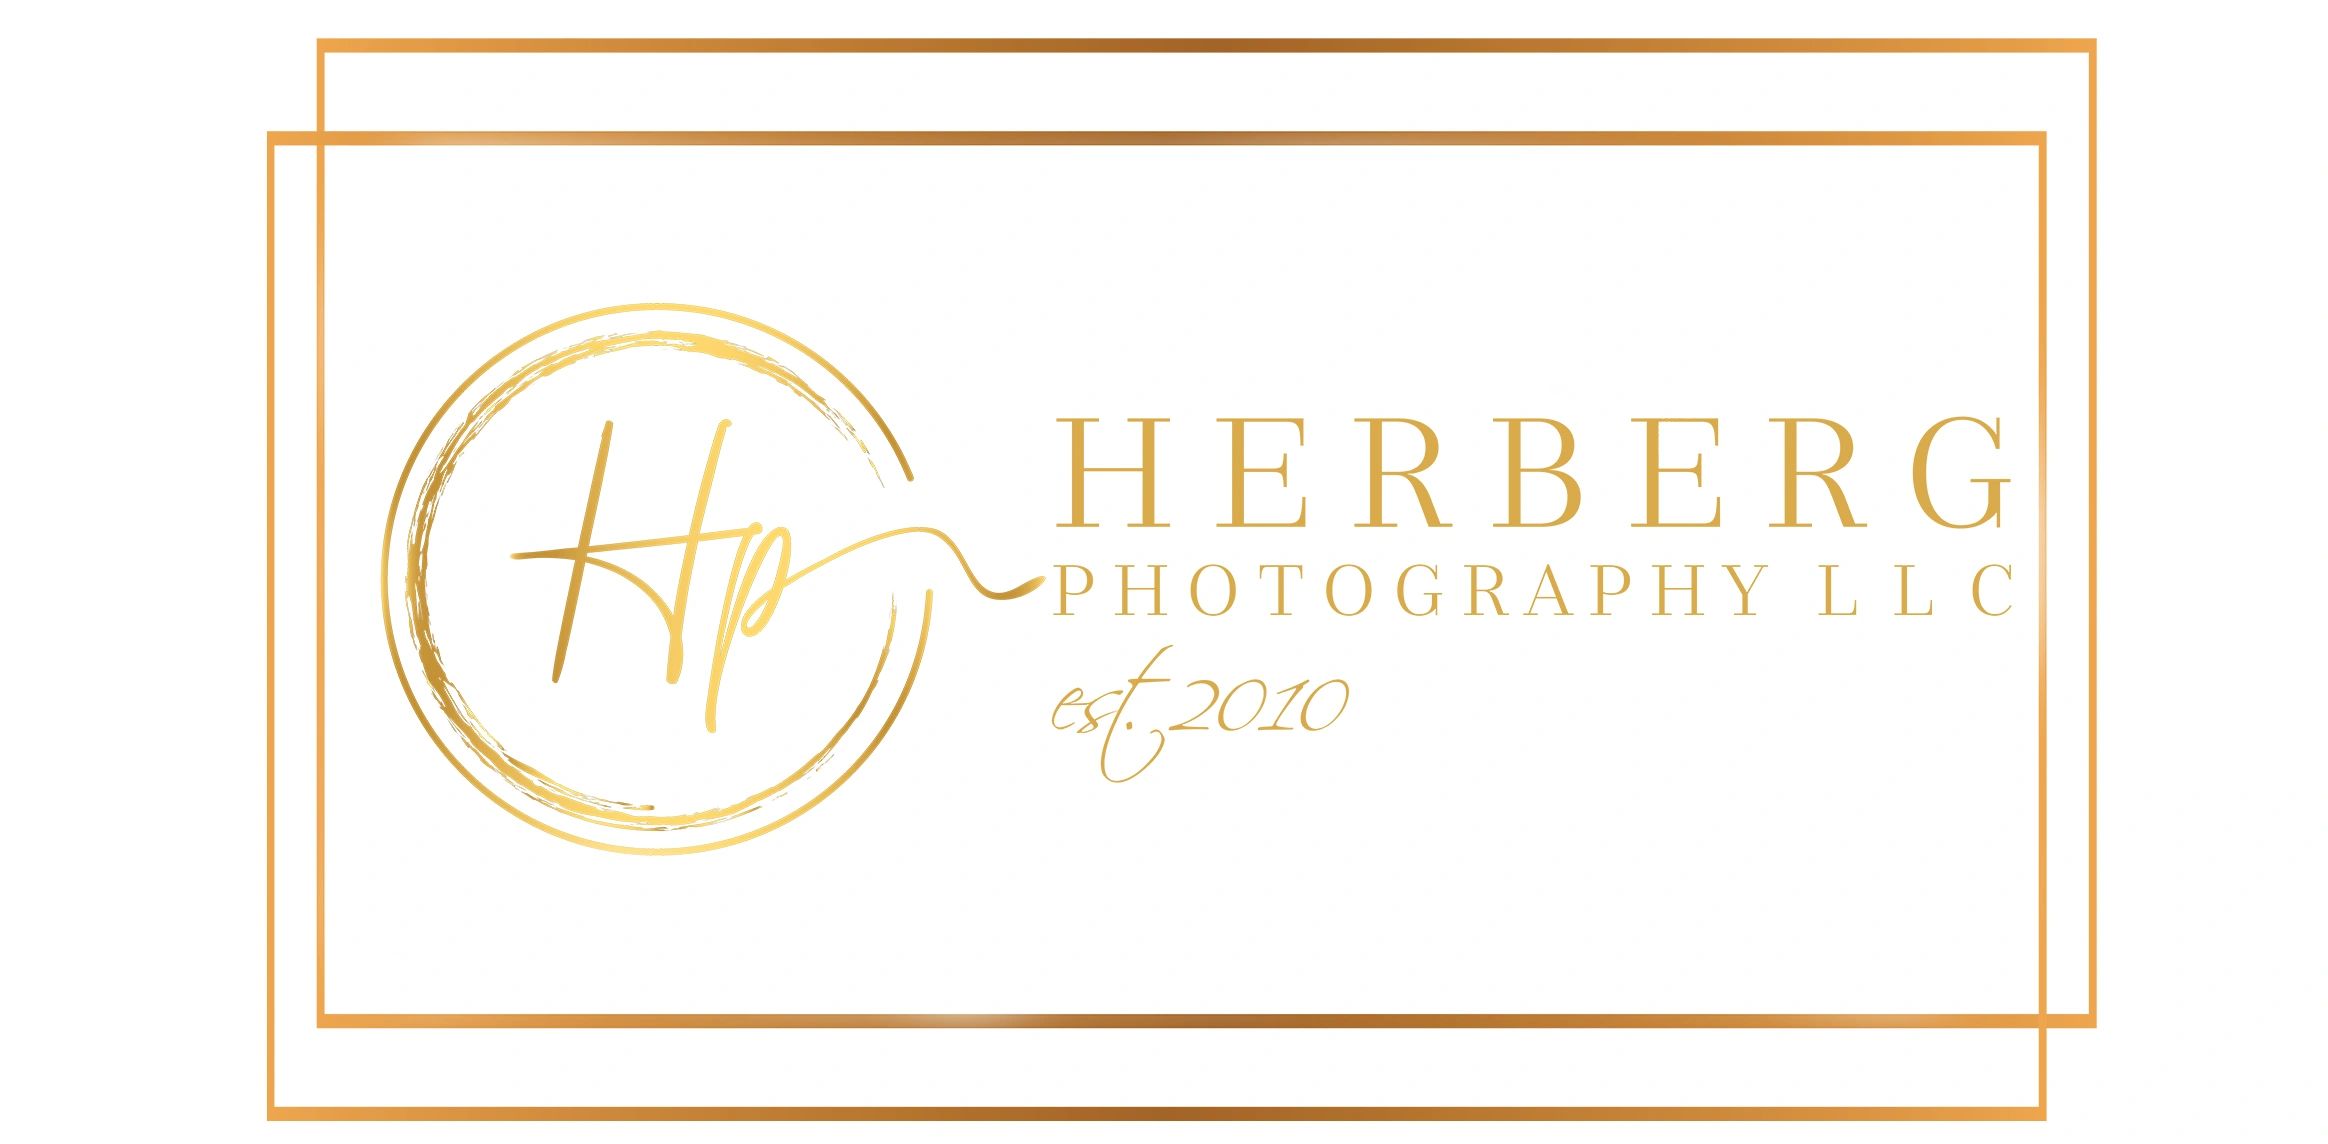 Herberg Photography specializes in newborn photos. 